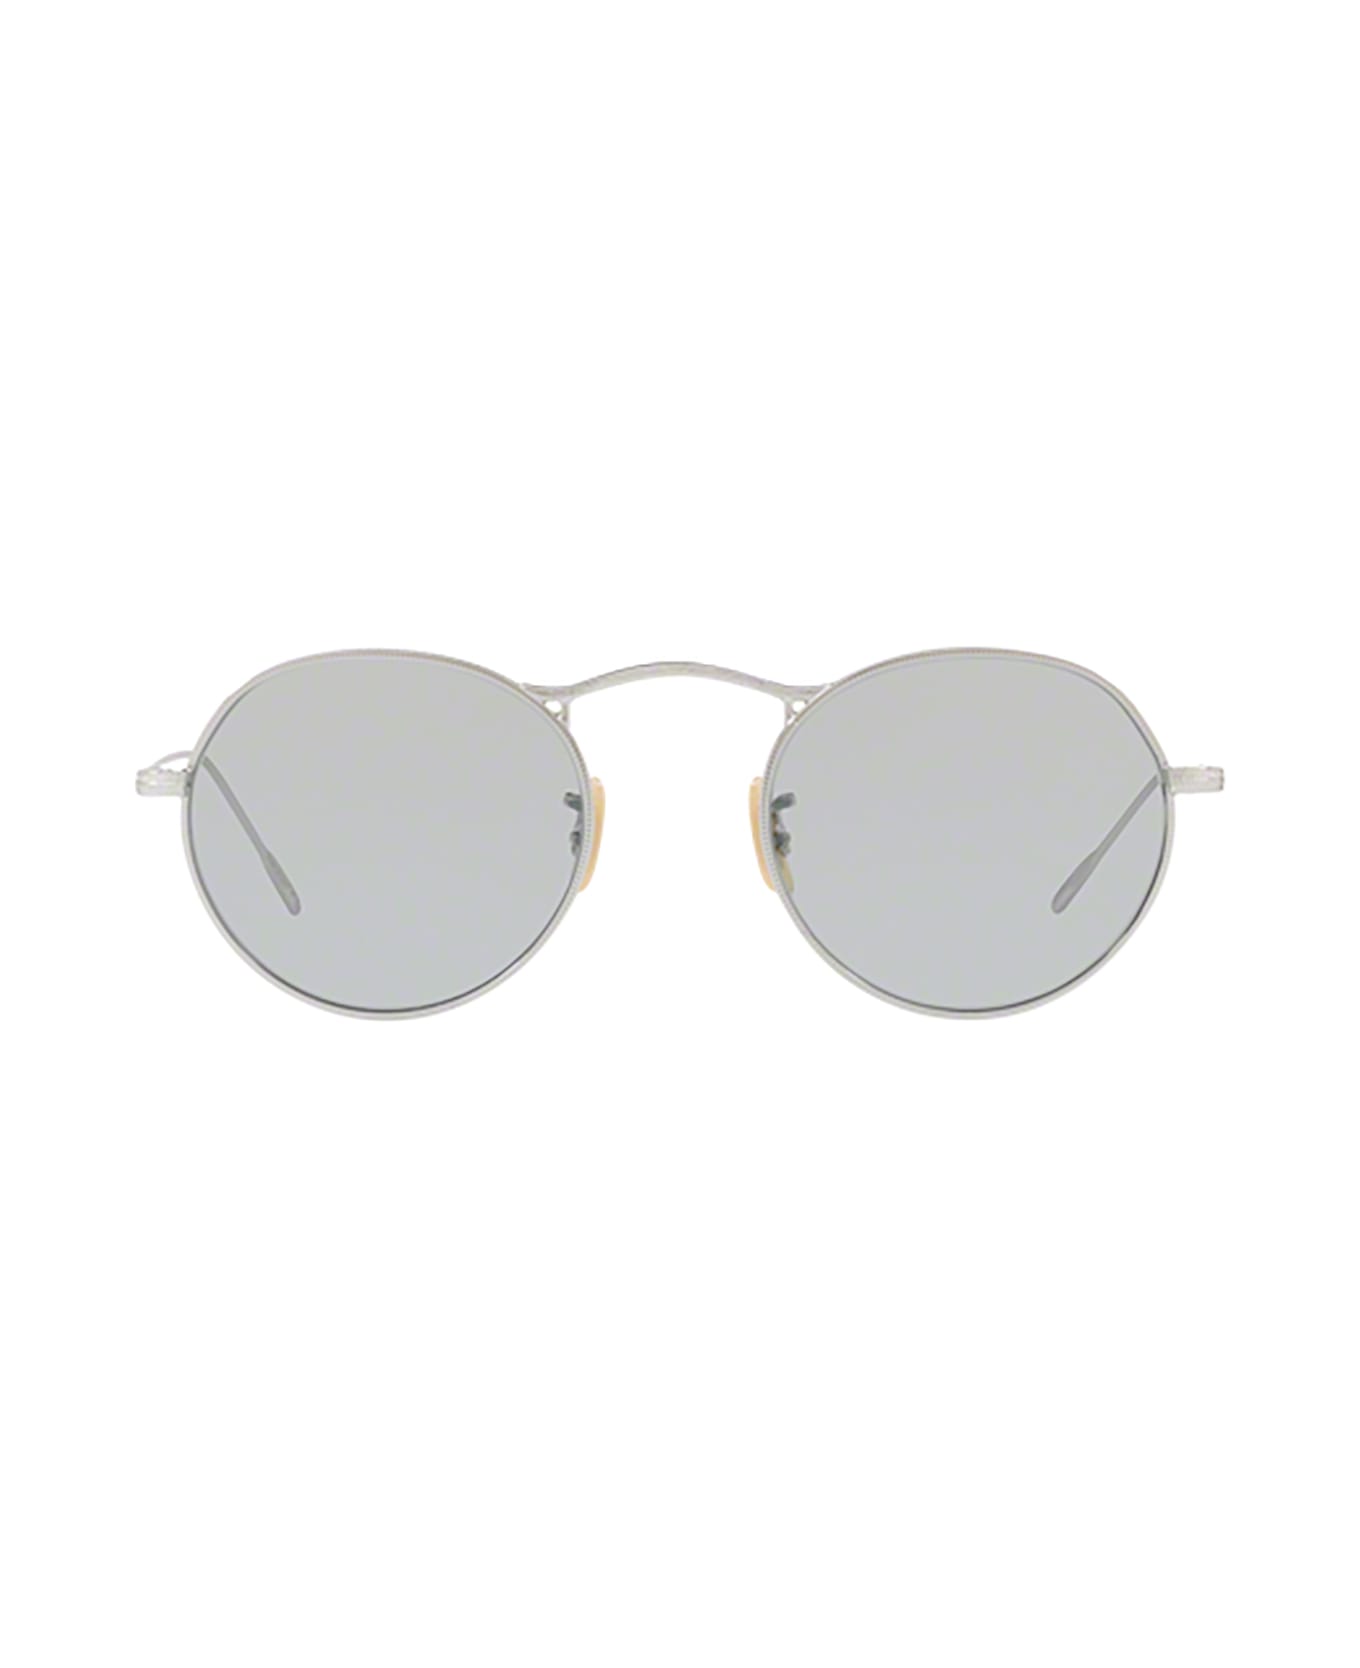 Oliver Peoples Ov1220s Silver Sunglasses - Silver